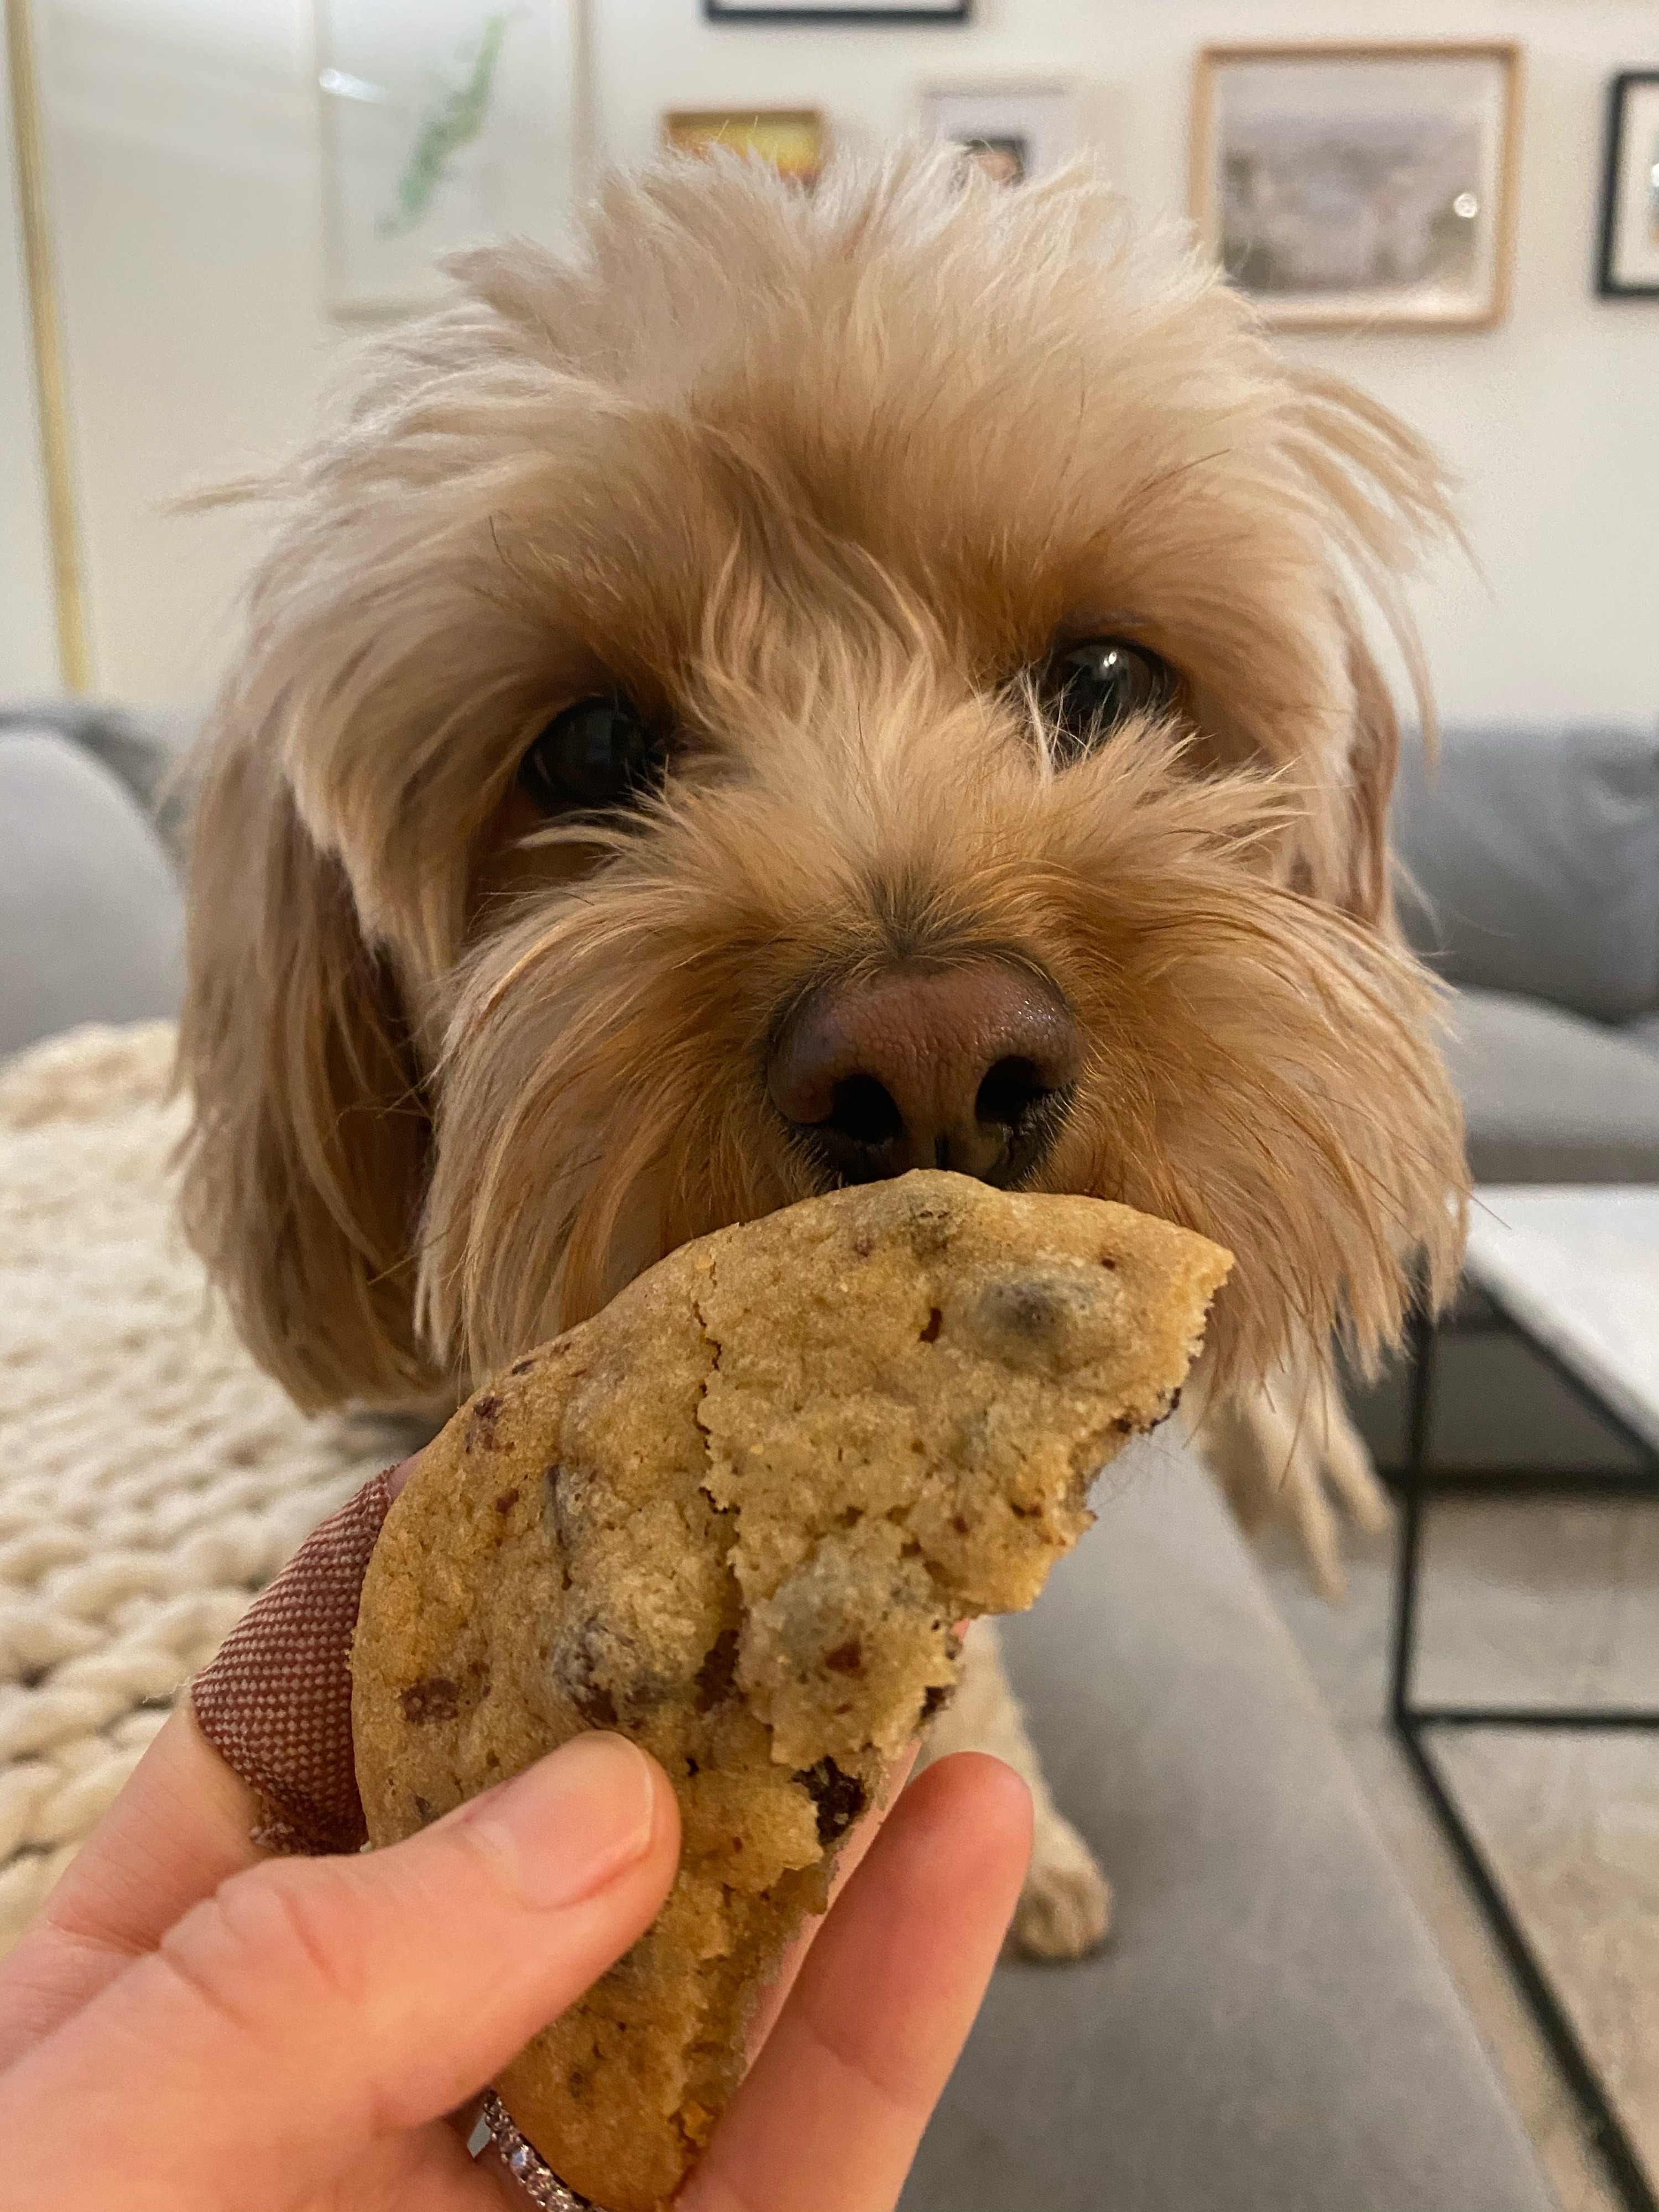 My dog Hudson smelling a chocolate chip cookie.